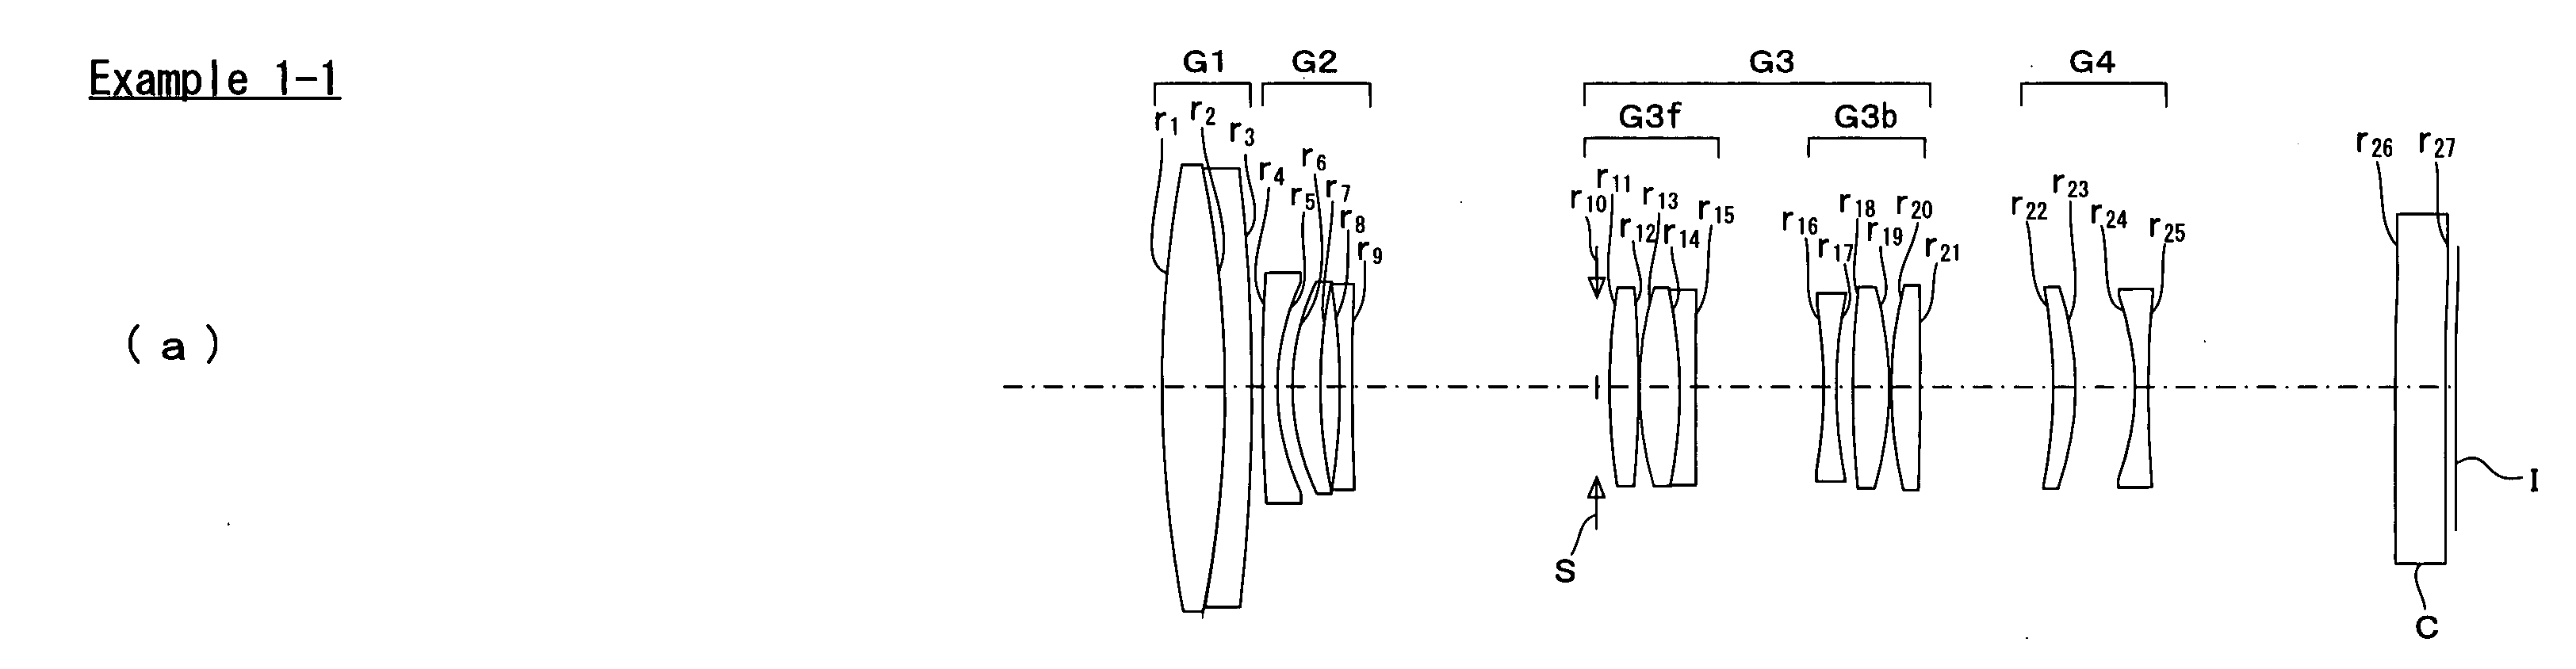 Zoom lens, and imaging apparatus incorporating the same